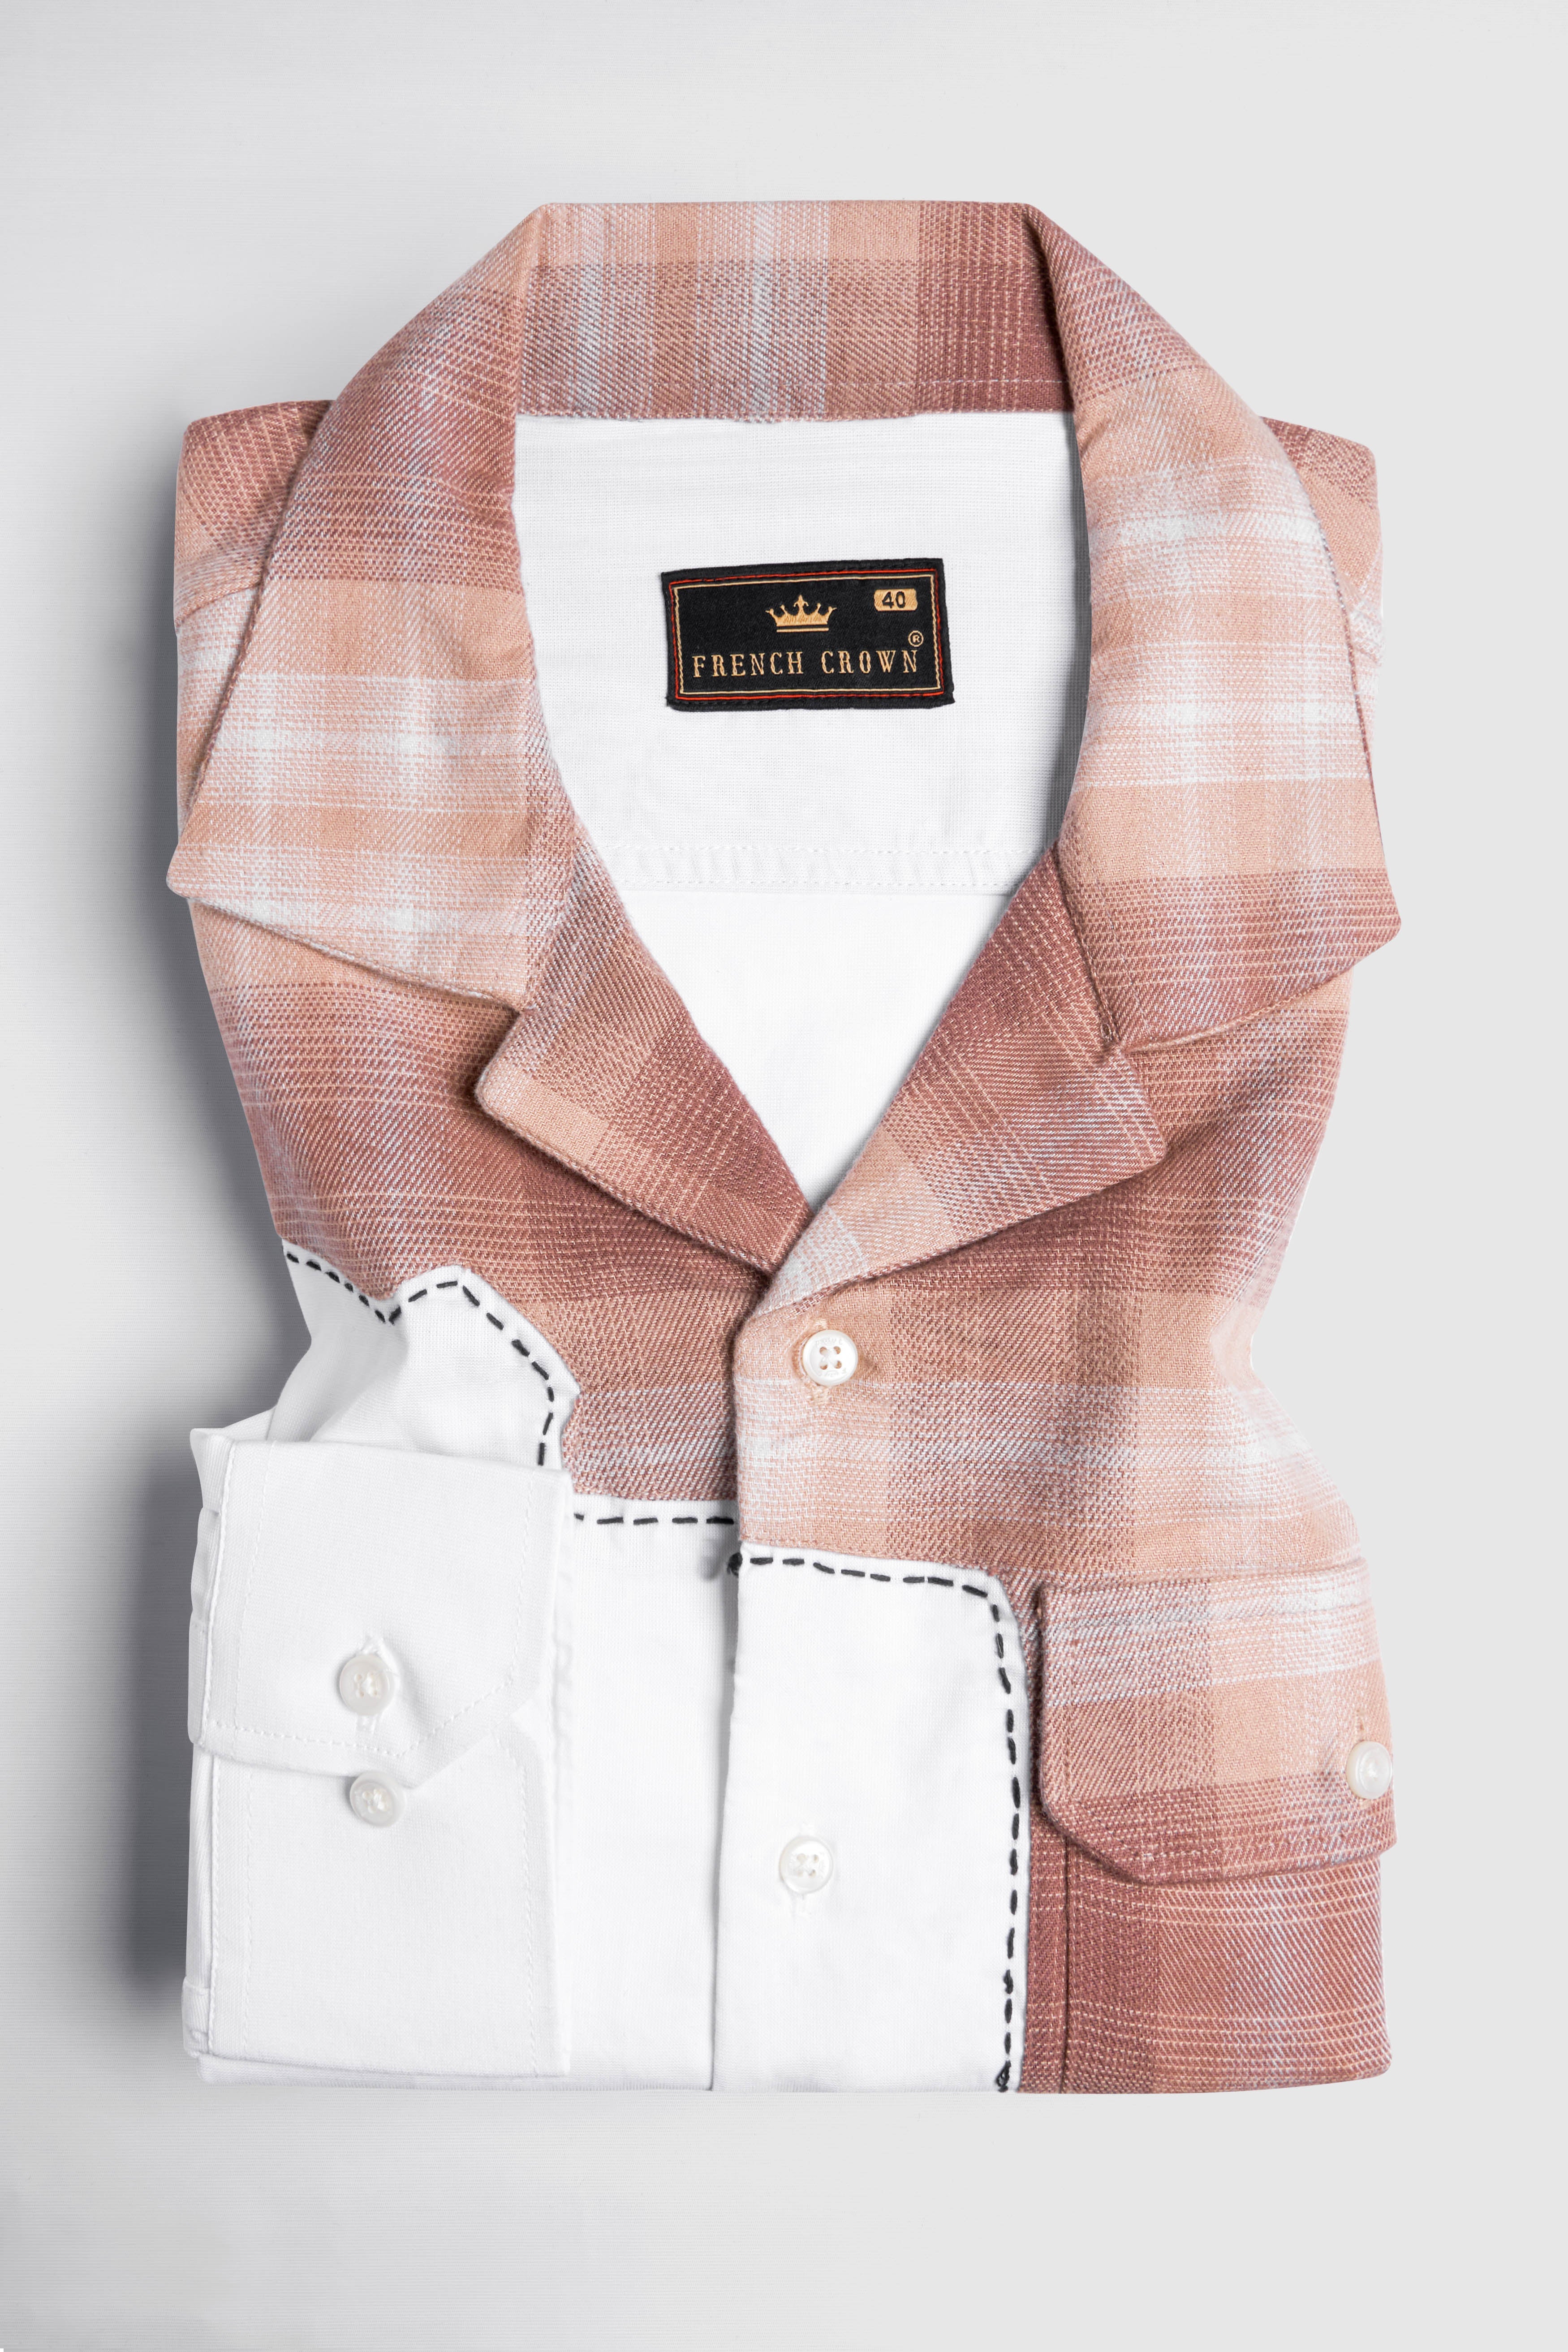 Bright White with Bizarre Brown Checkered with Hand Stitched Chambray Designer Shirt